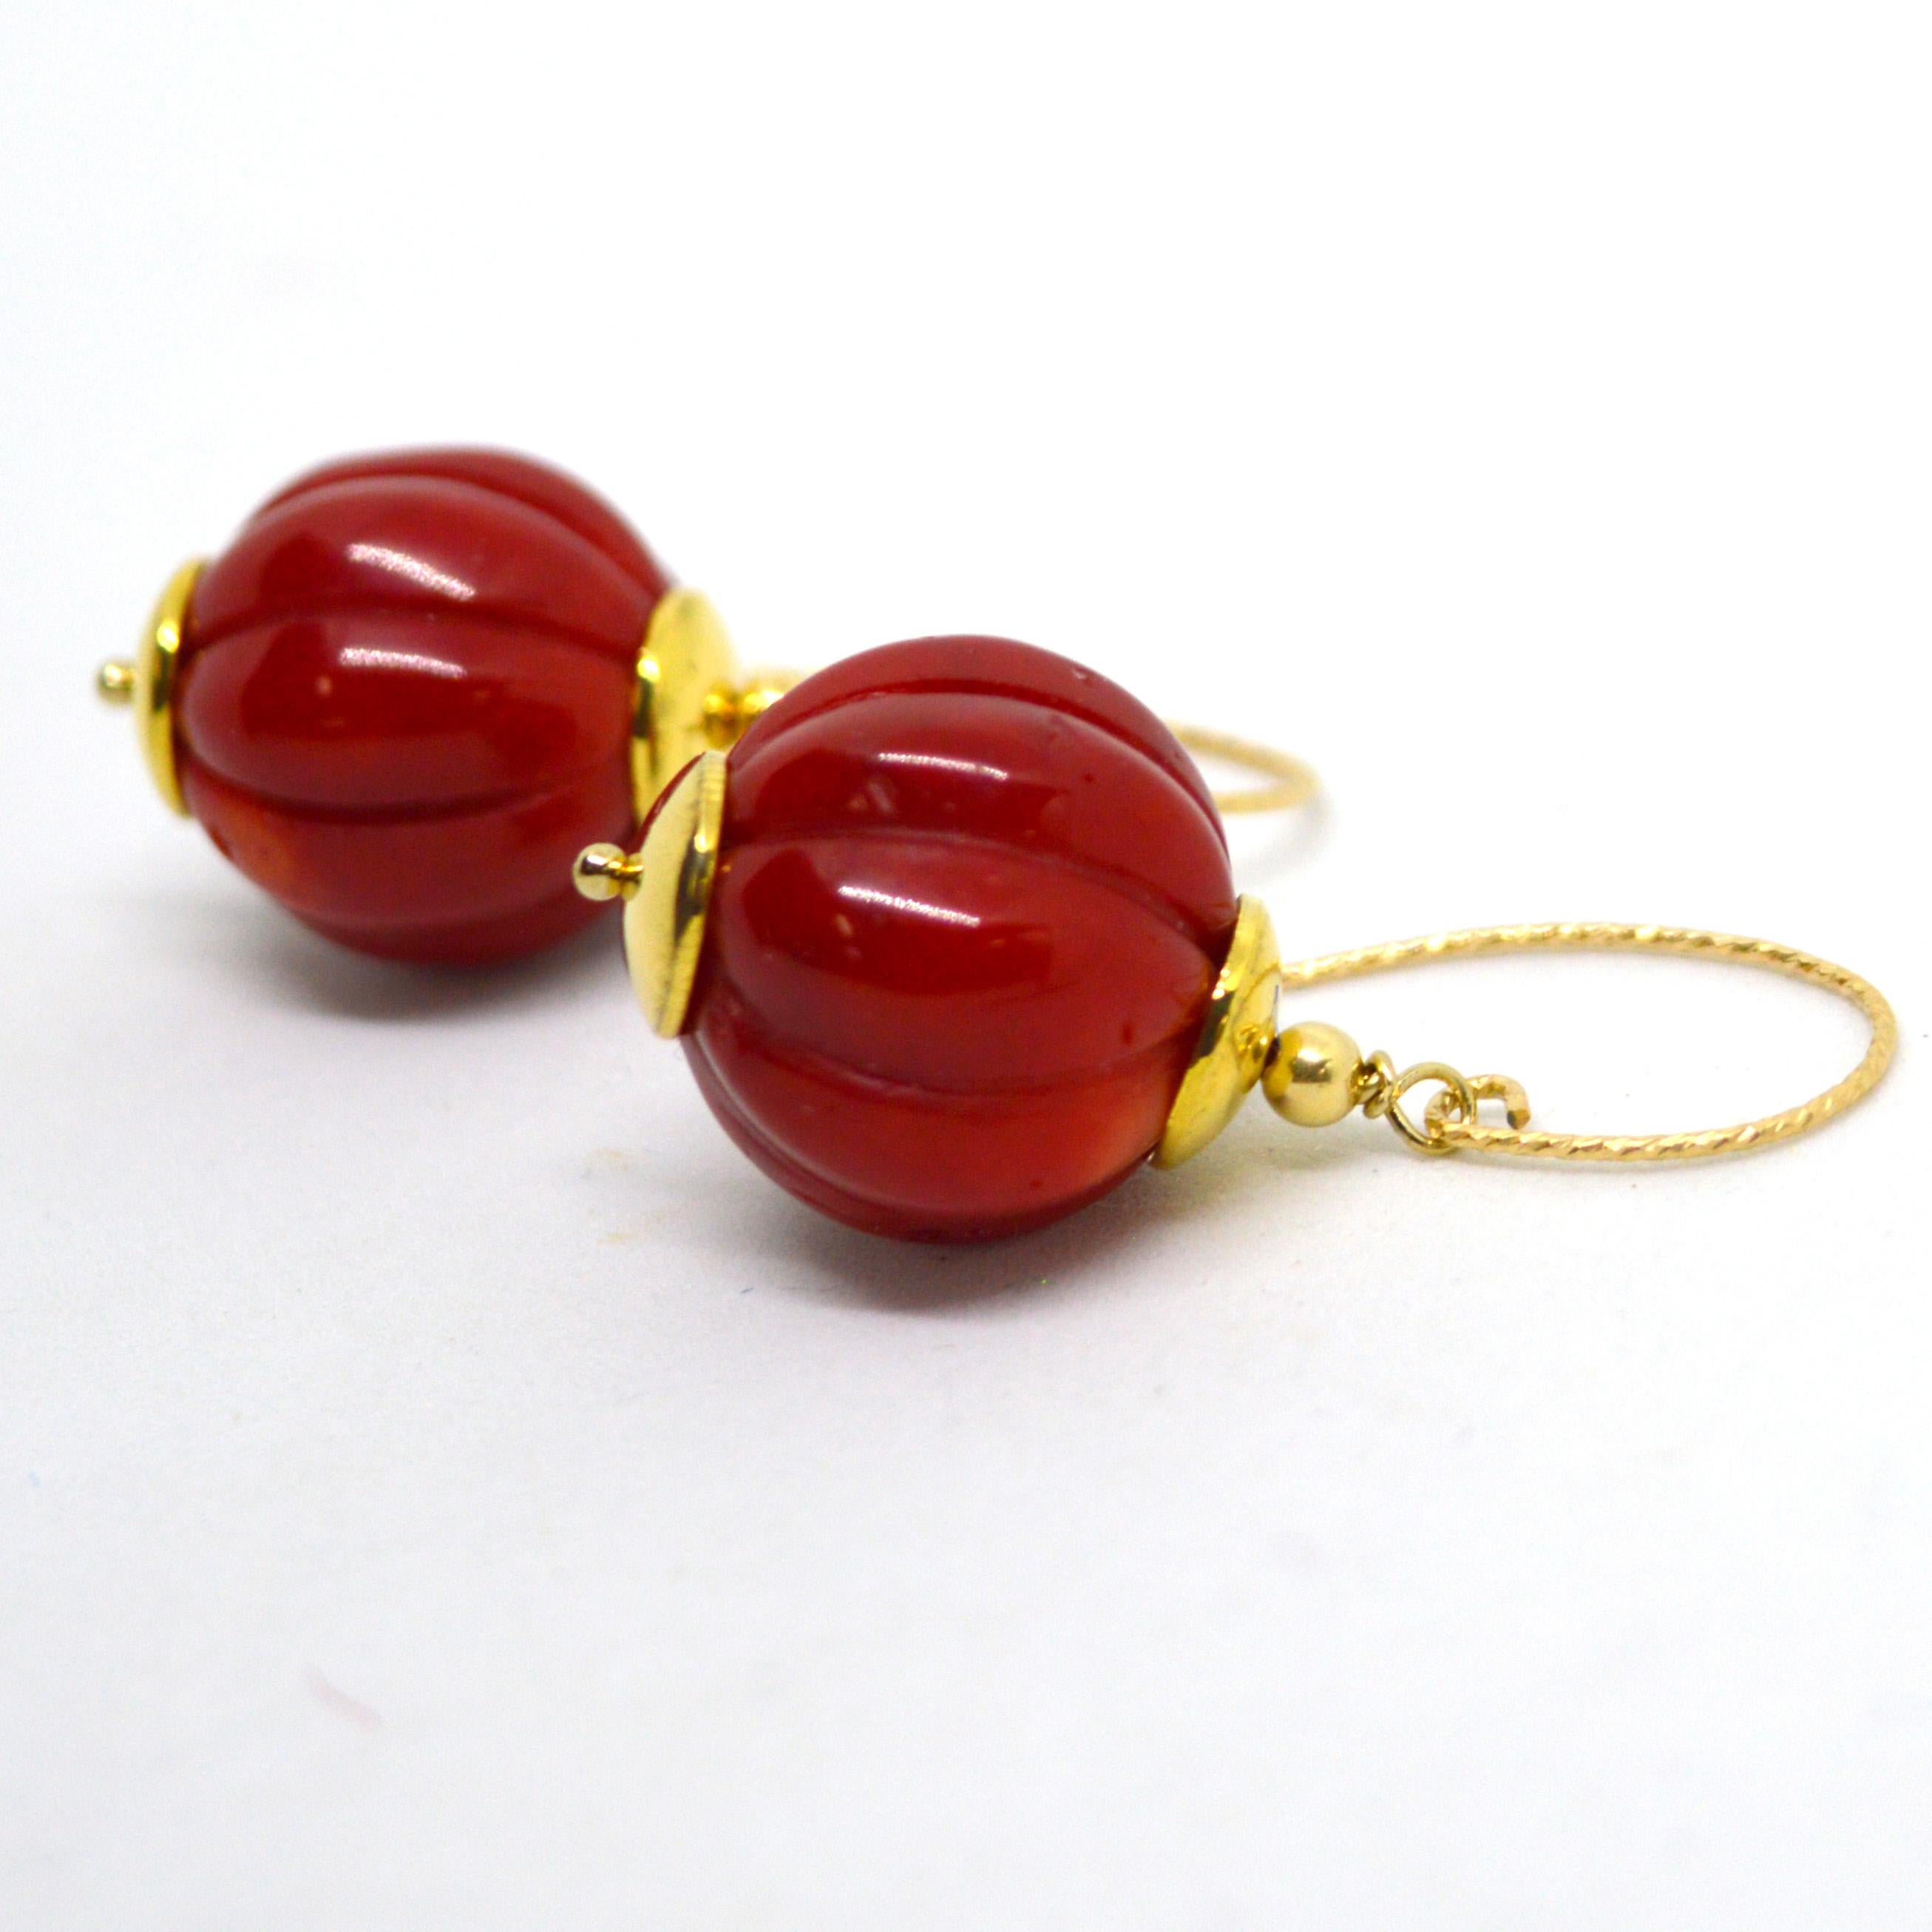 Carved Sea Bamboo bead dyed red, each bead is 18mm in size.
14k gold filled sheppard.
Total length of earring is 38mm with each earring weighing 6.5g.